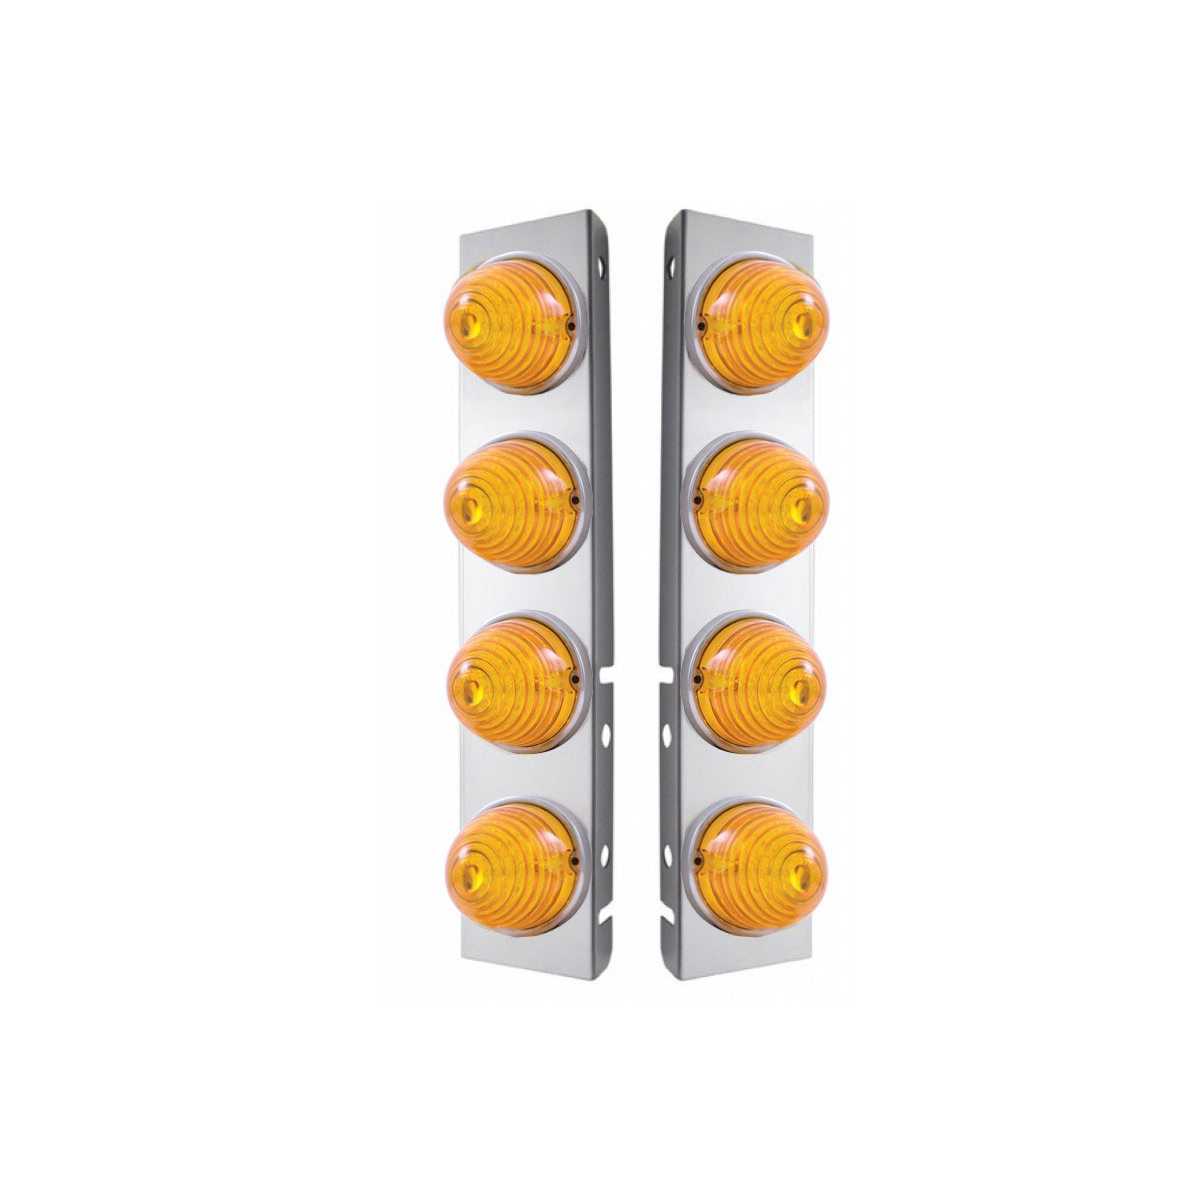 Peterbilt Stainless Front Air Cleaner Bracket w/ Eight 17 LED Beehive Lights & Stainless Bezels - Amber LED/Amber Lens